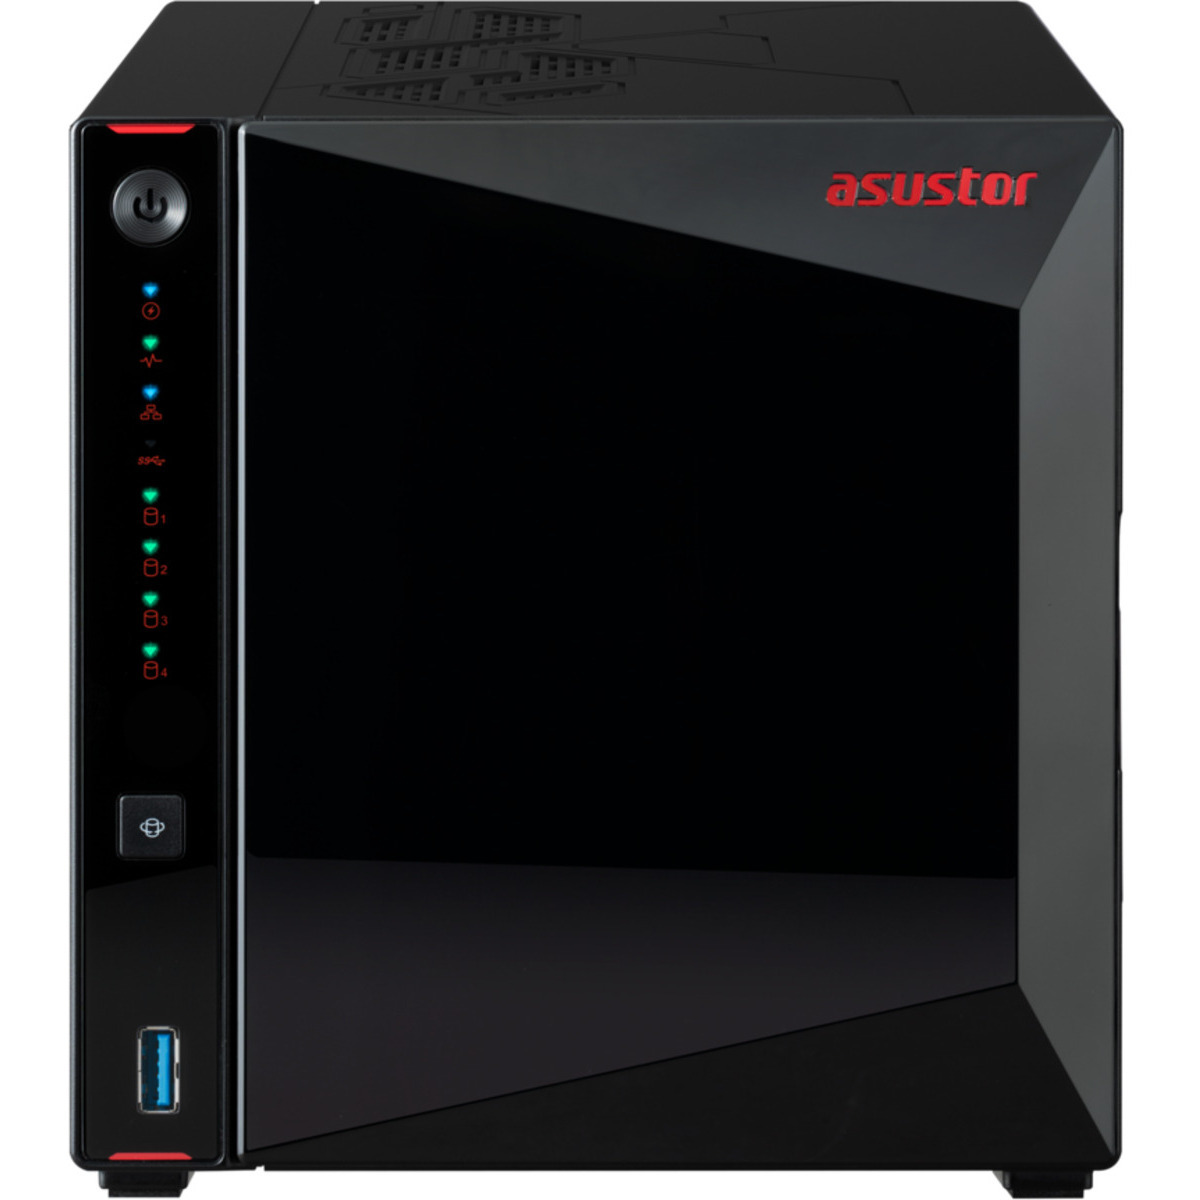 buy $837 ASUSTOR Nimbustor 4 Gen2 AS5404T 16tb Desktop NAS - Network Attached Storage Device 4x4000gb Toshiba MN Series MN08ADA400E 3.5 7200rpm SATA 6Gb/s HDD NAS Class Drives Installed - Burn-In Tested - ON SALE - FREE RAM UPGRADE - nas headquarters buy network attached storage server device das new raid-5 free shipping simply usa Nimbustor 4 Gen2 AS5404T